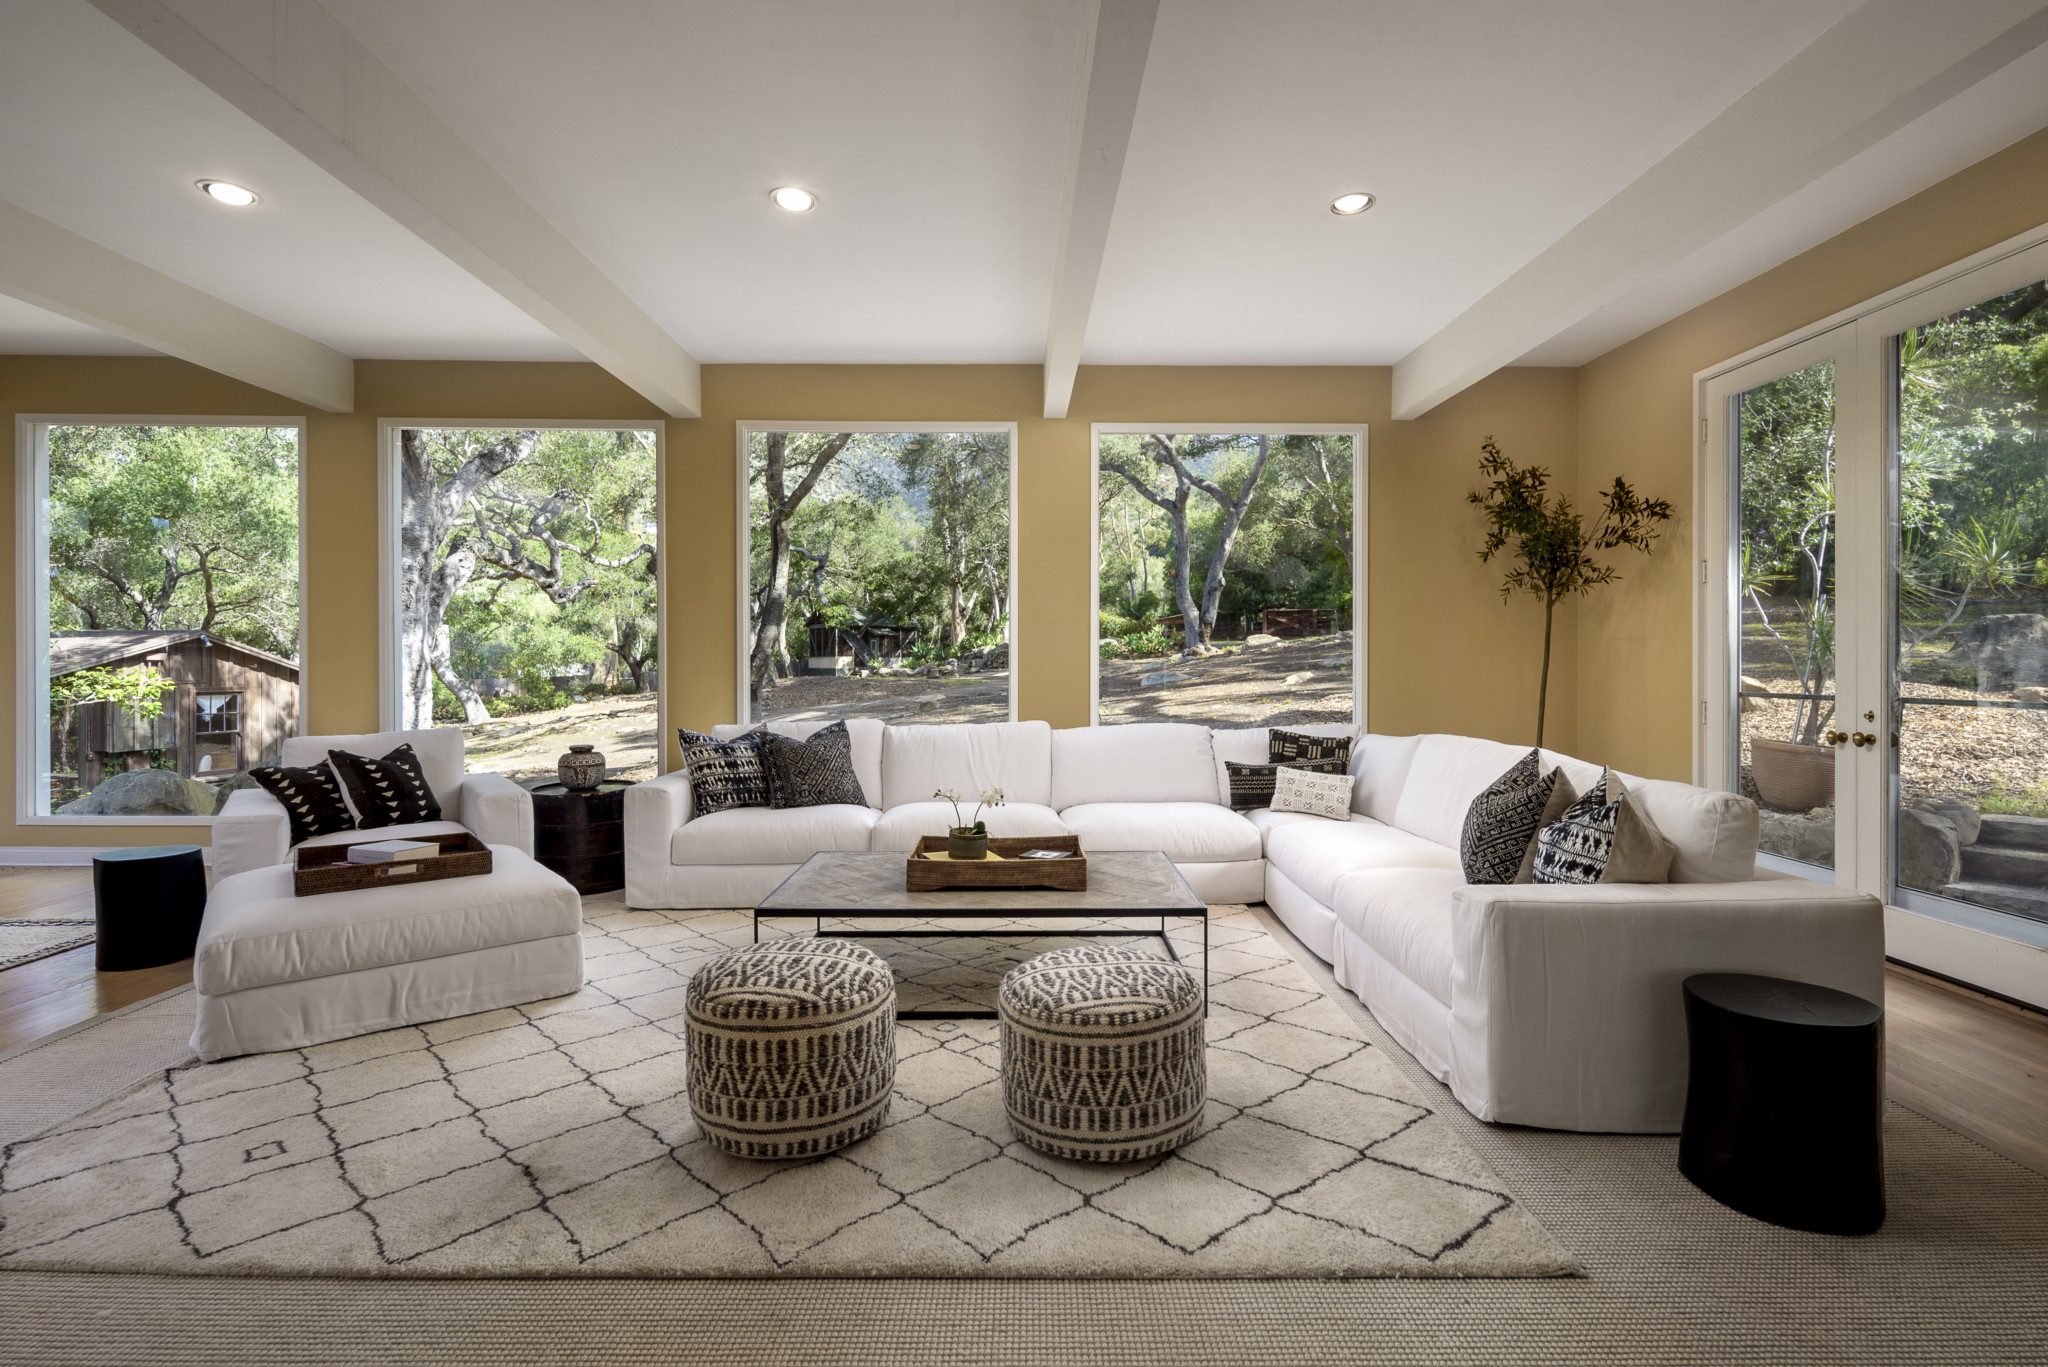 one of the many spacious living areas, framed by romantic oak trees and mountain views.